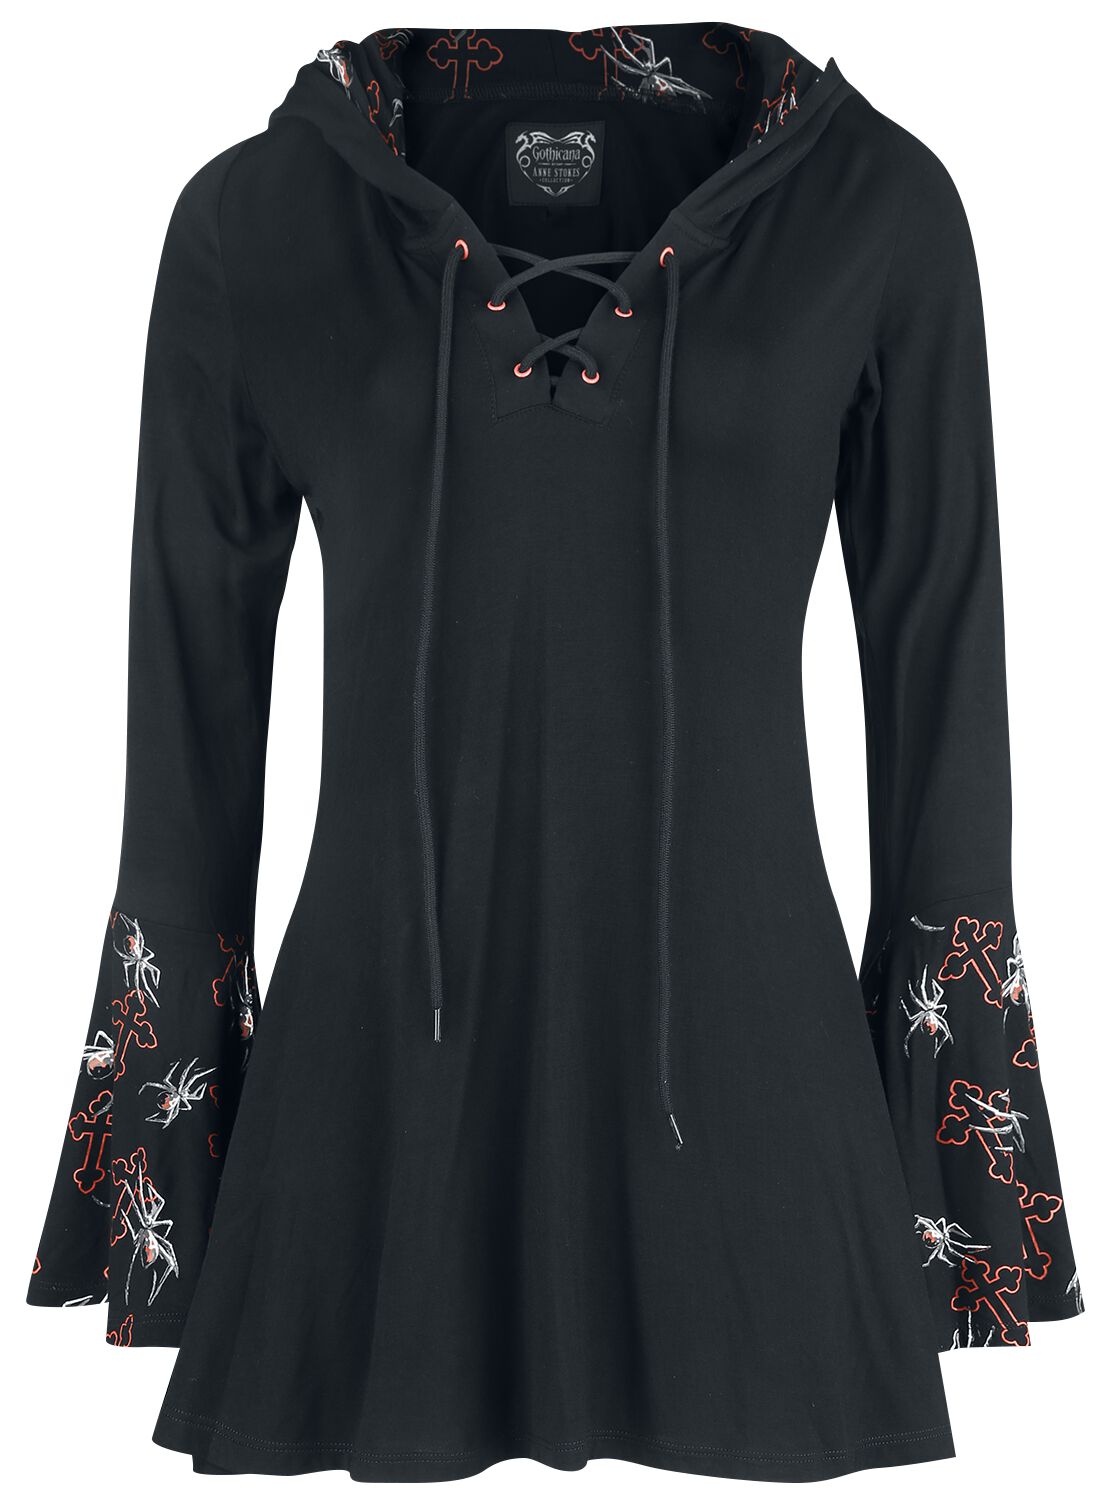 Image of Maglia Maniche Lunghe Gothic di Gothicana by EMP - Gothicana X Anne Stokes - Black Long-Sleeve Top with Lacing, Print and Large Hood - M a 4XL - Donna - nero